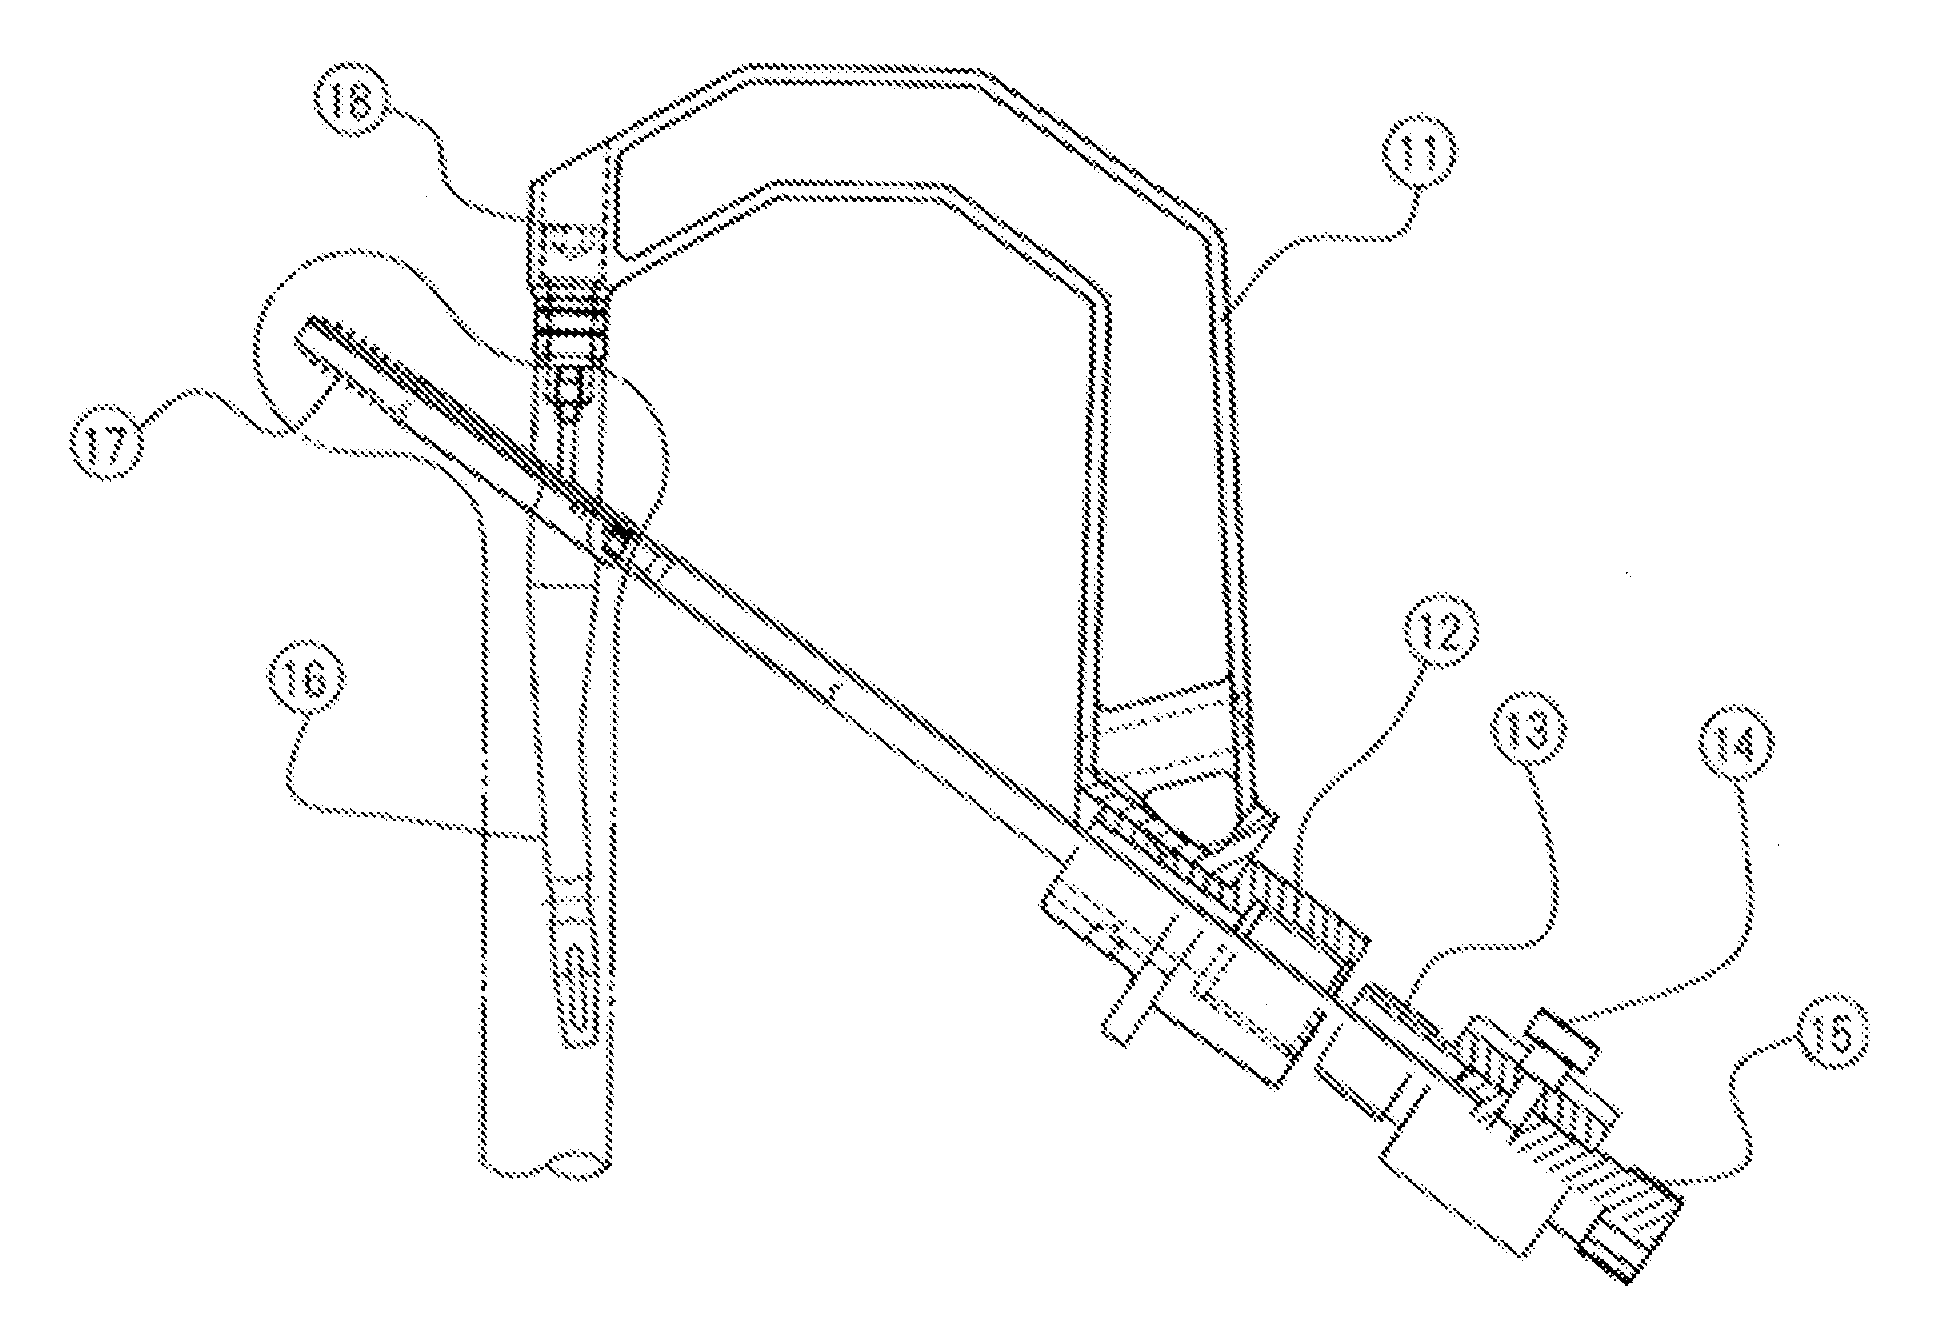 Osteosynthesis apparatus for proximal femur fracture and master screw-type screw apparatus for osteosynthesis apparatus for proximal femur fracture